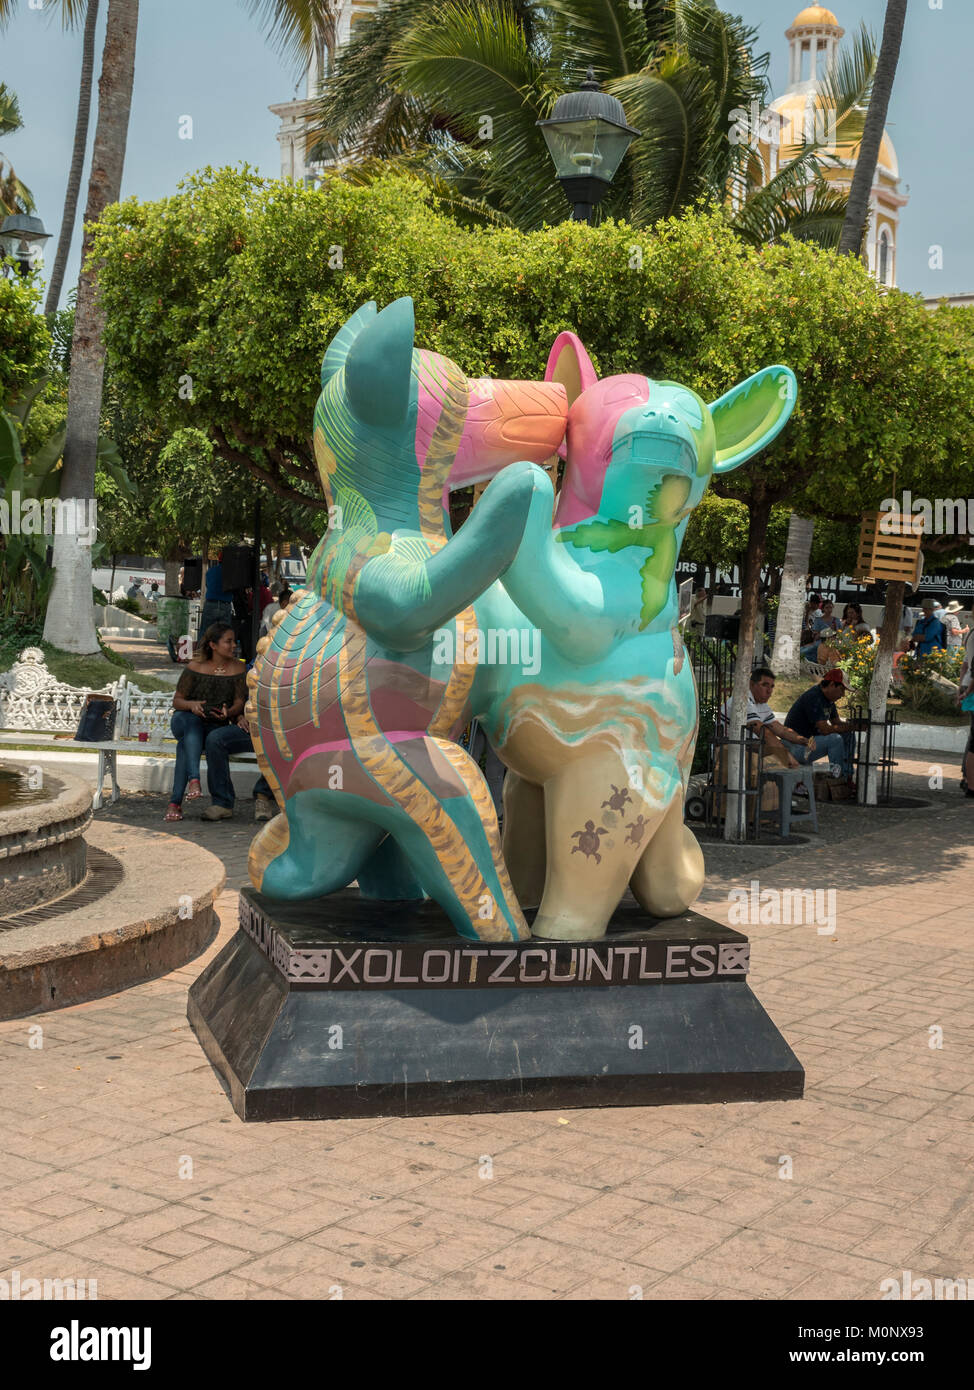 Statue Of The Colima Dancing Dogs (Xoloitzcuintle) A Hairless Dog Breed These Statues Are Painted By Artists As Public Sculpture Comala Mexico Stock Photo